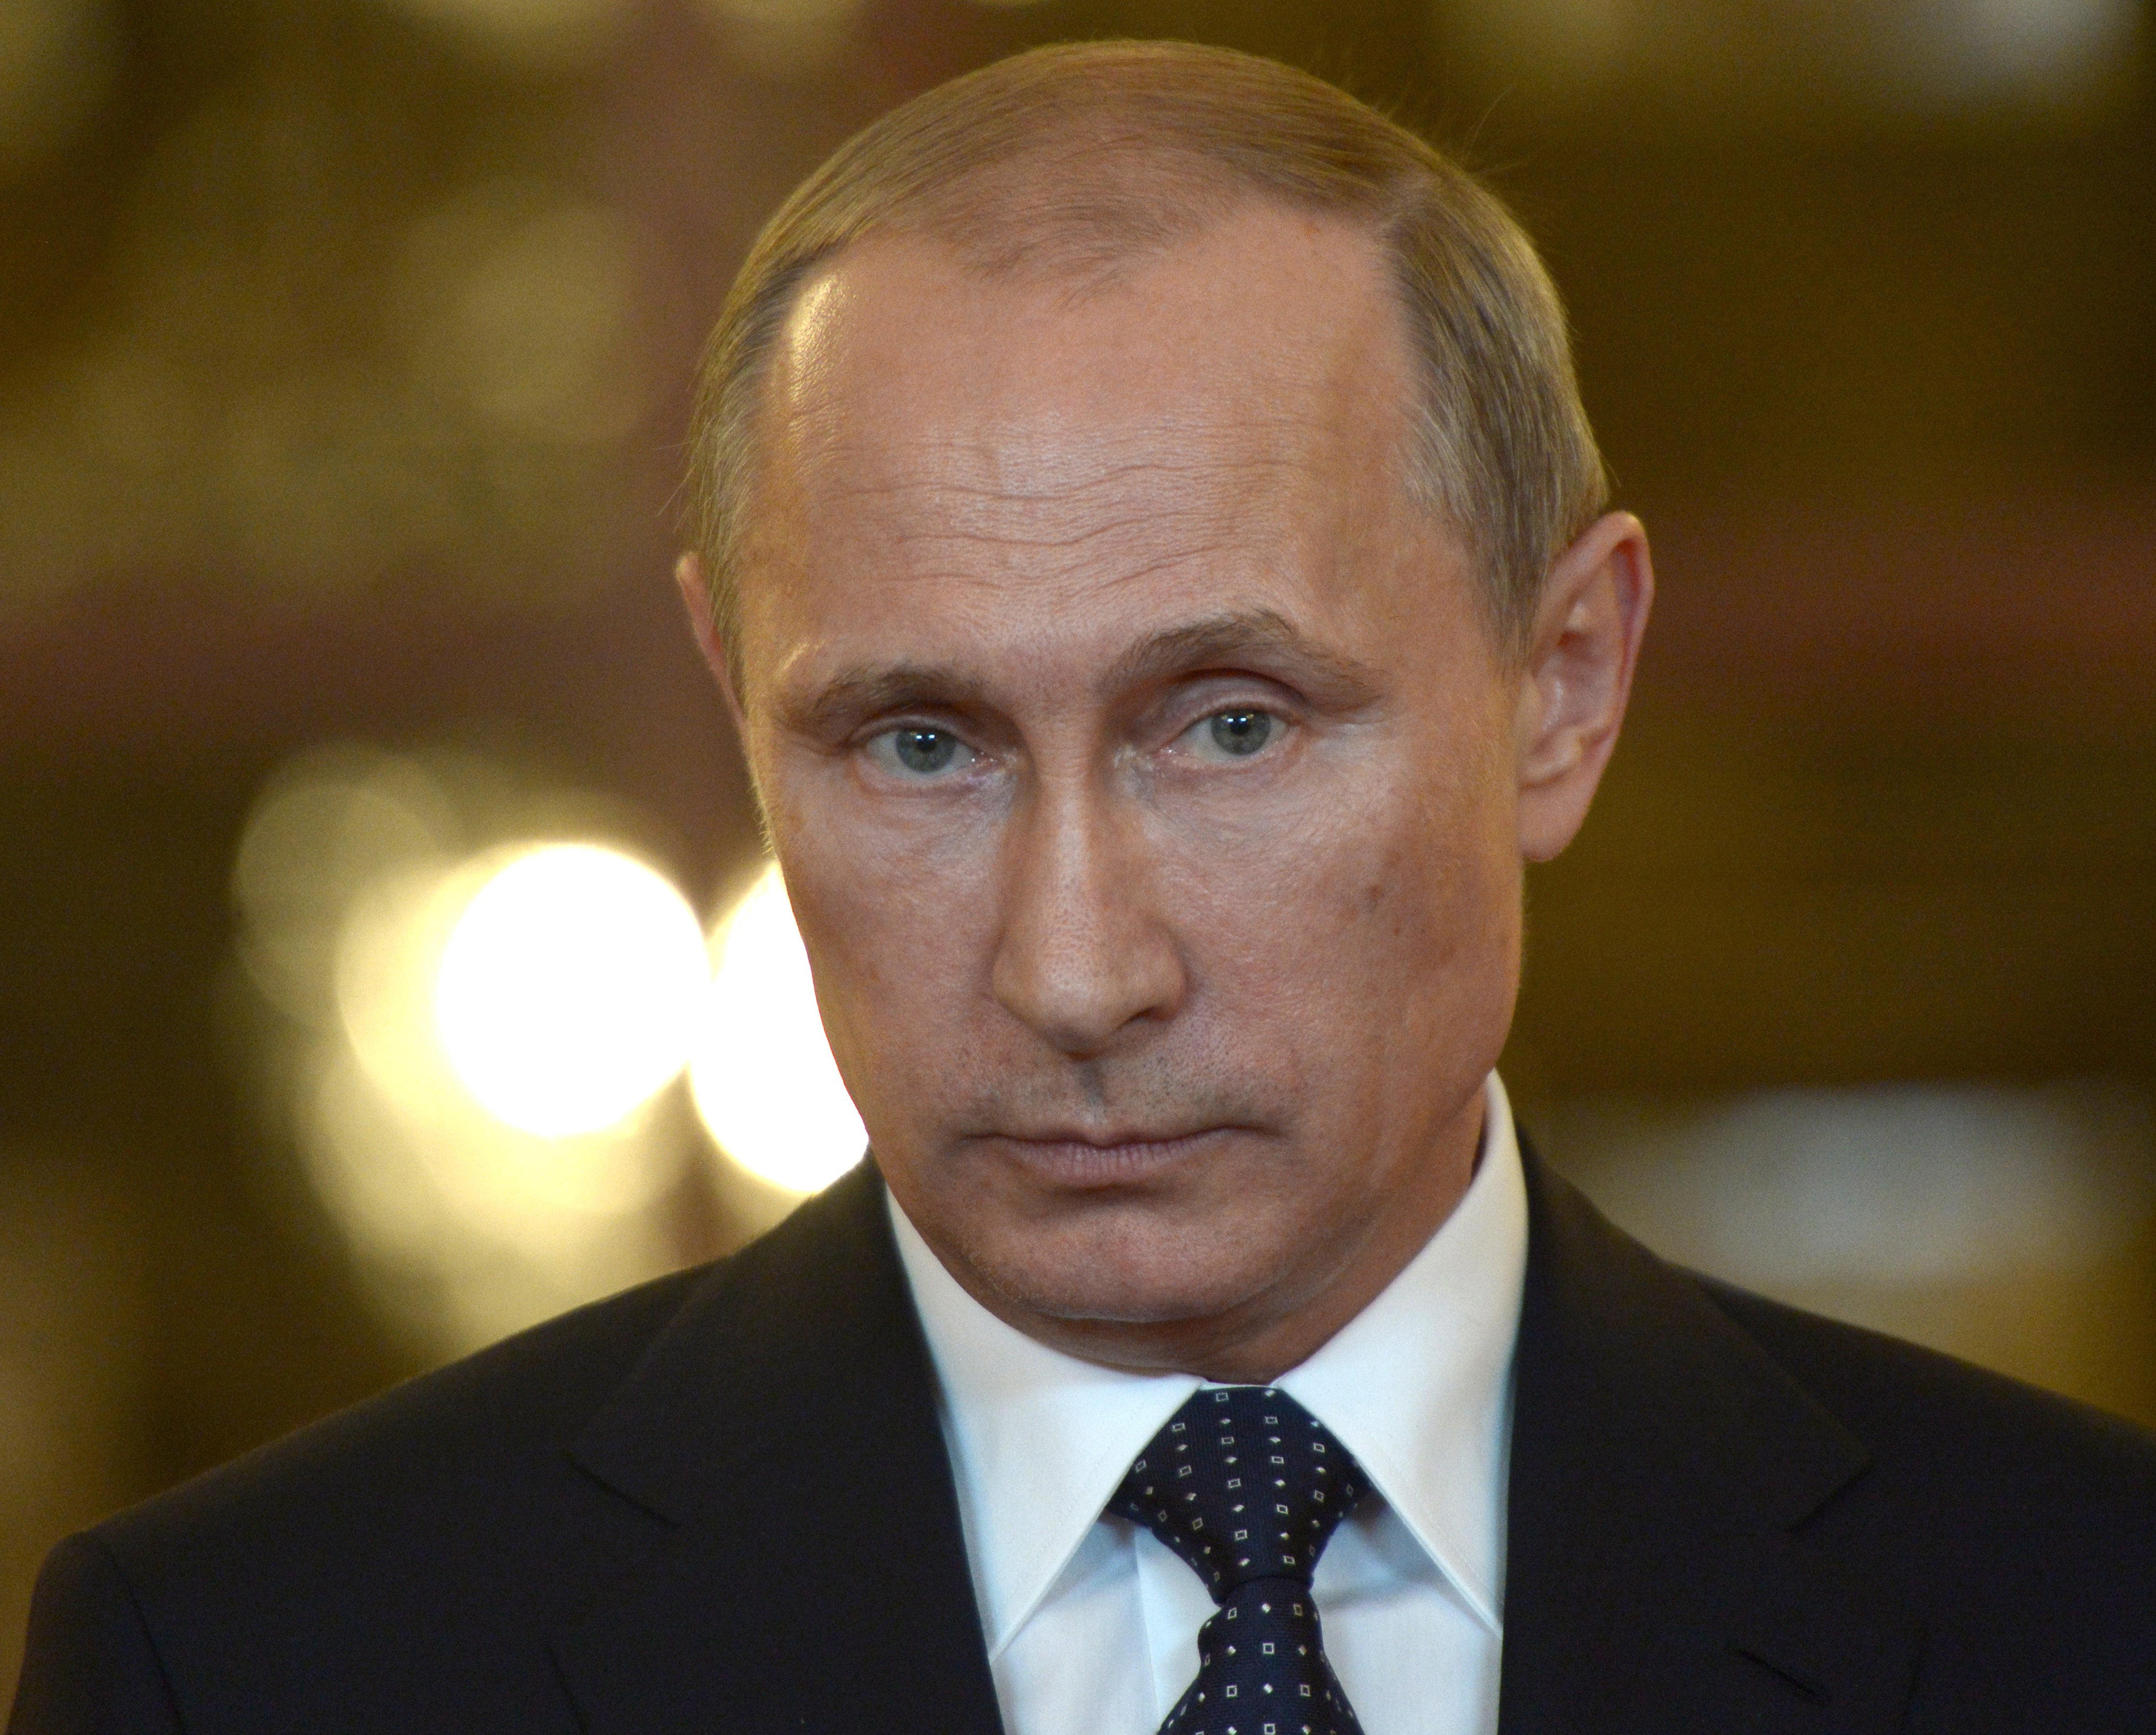 Putin has vowed to support the Bashar al-Assad administration against Isis